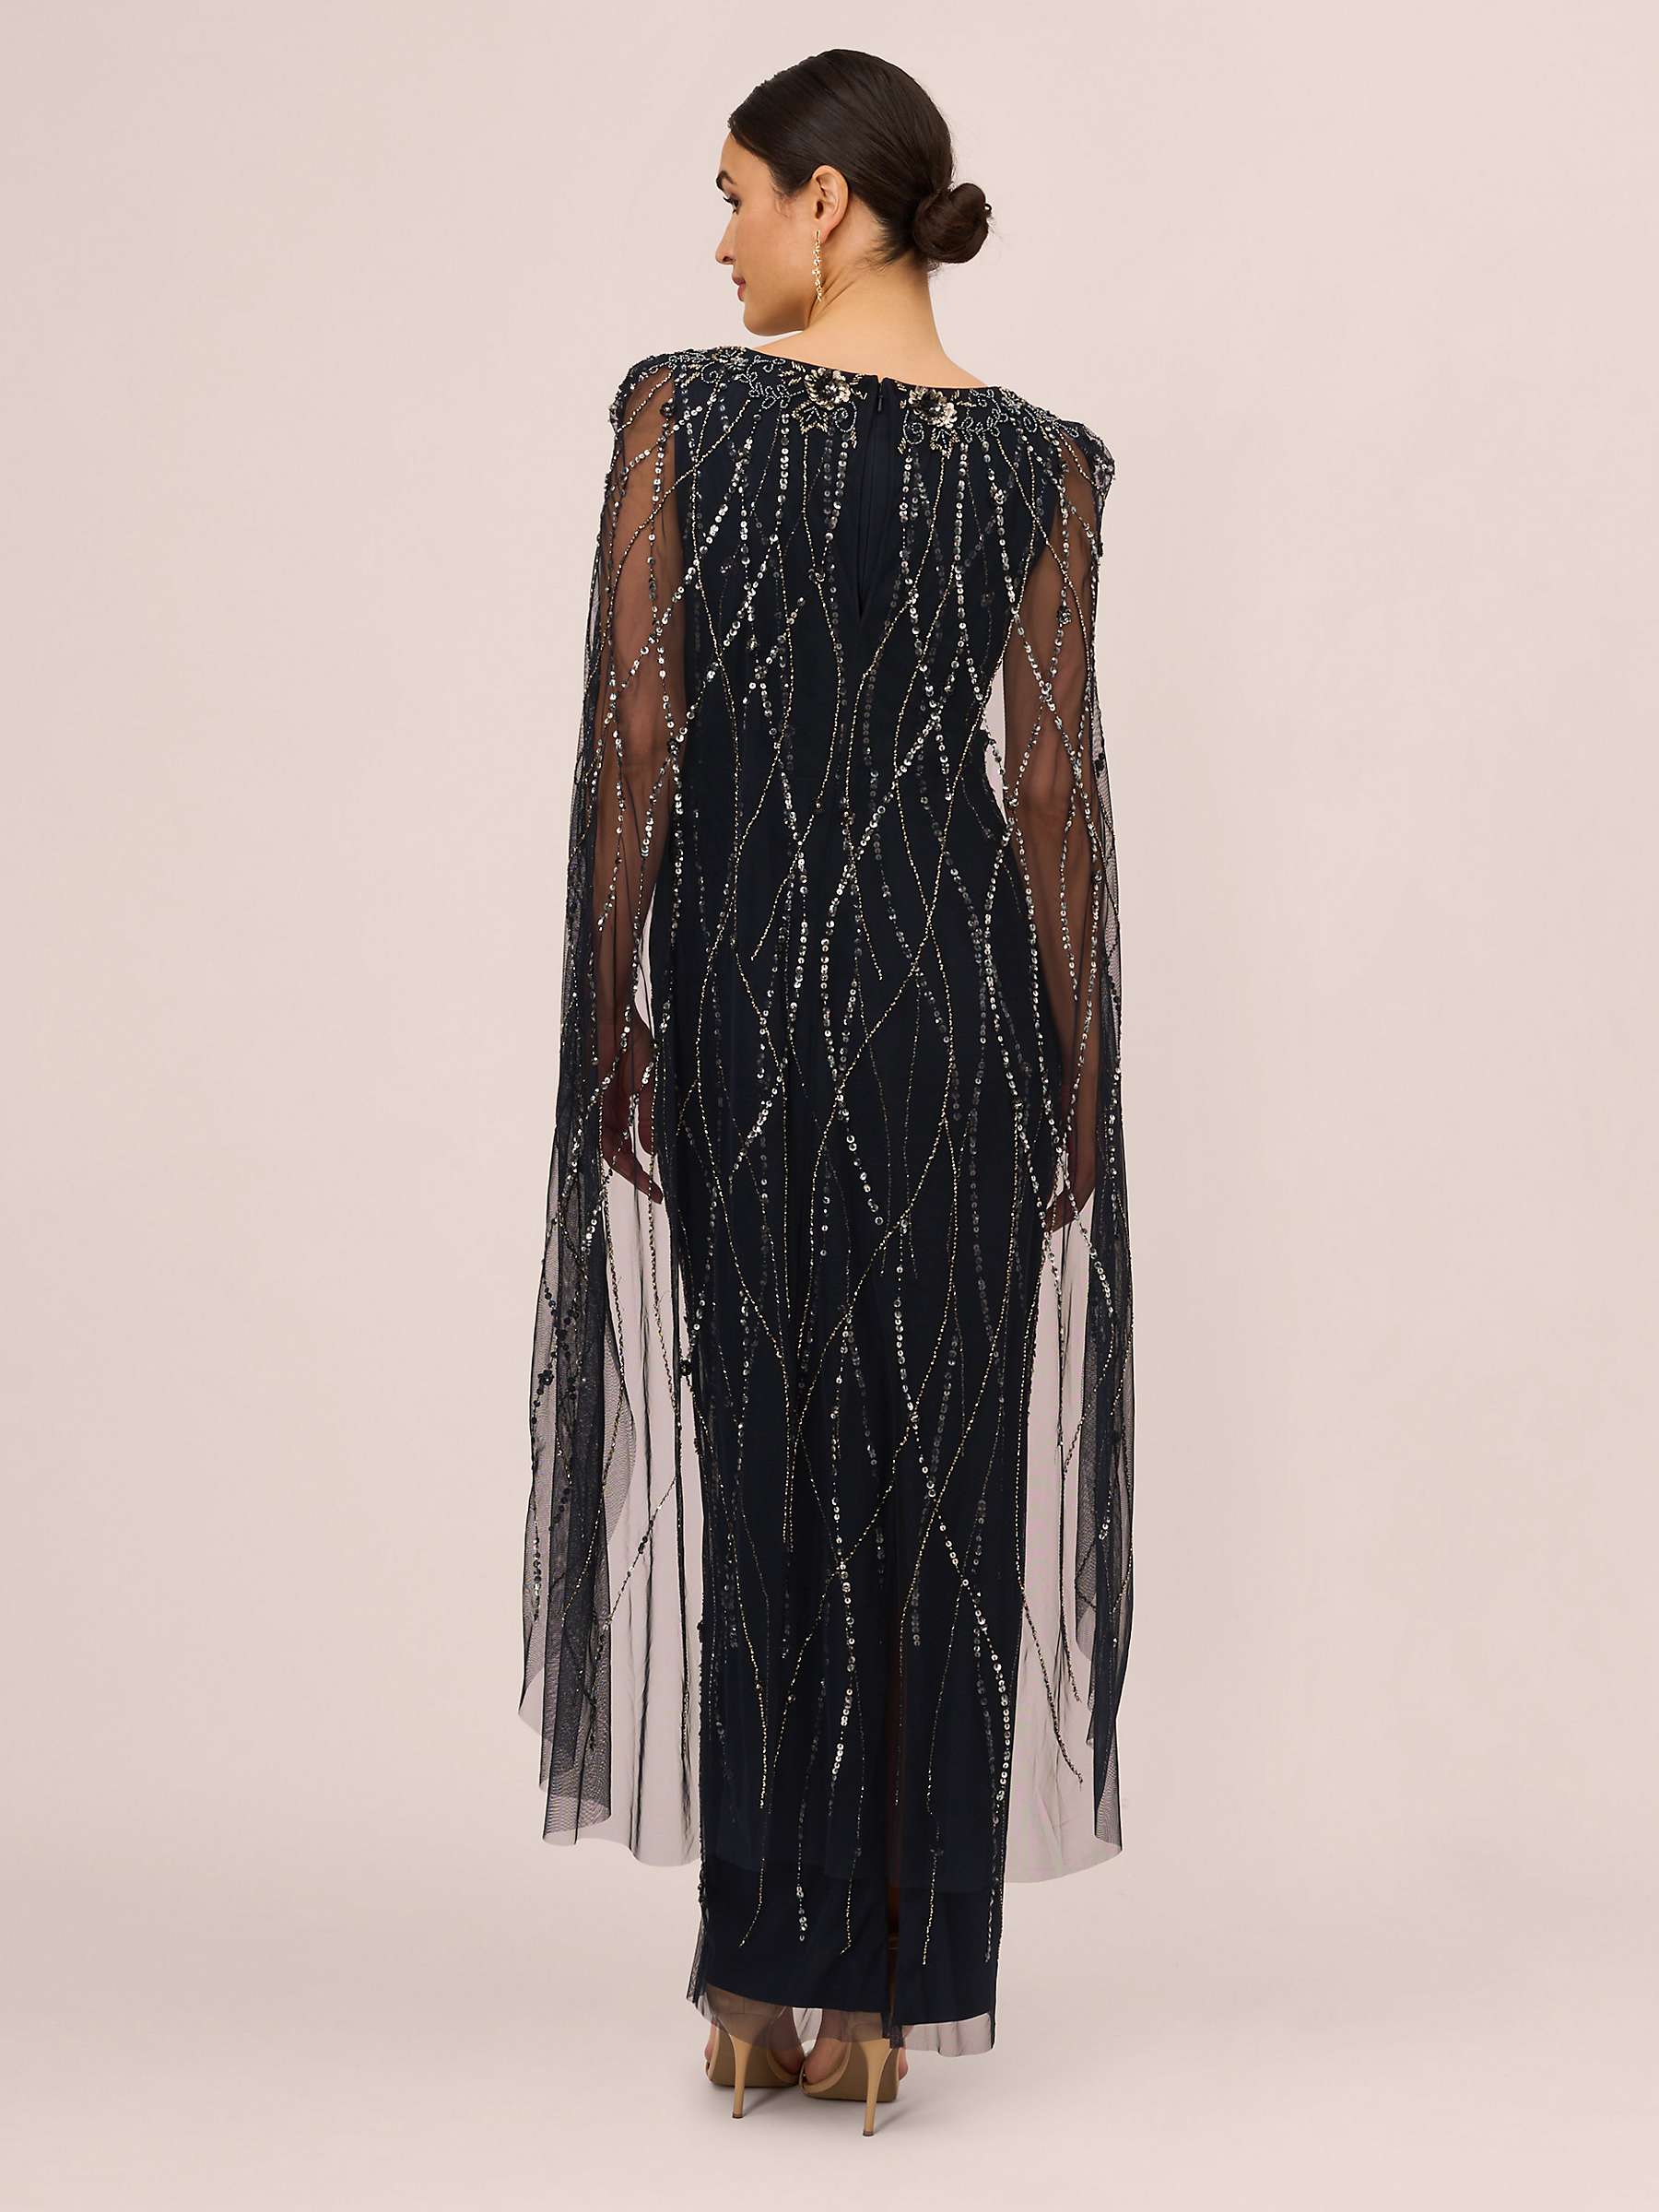 Adrianna Papell Beaded Cape Dress, Midnight at John Lewis & Partners